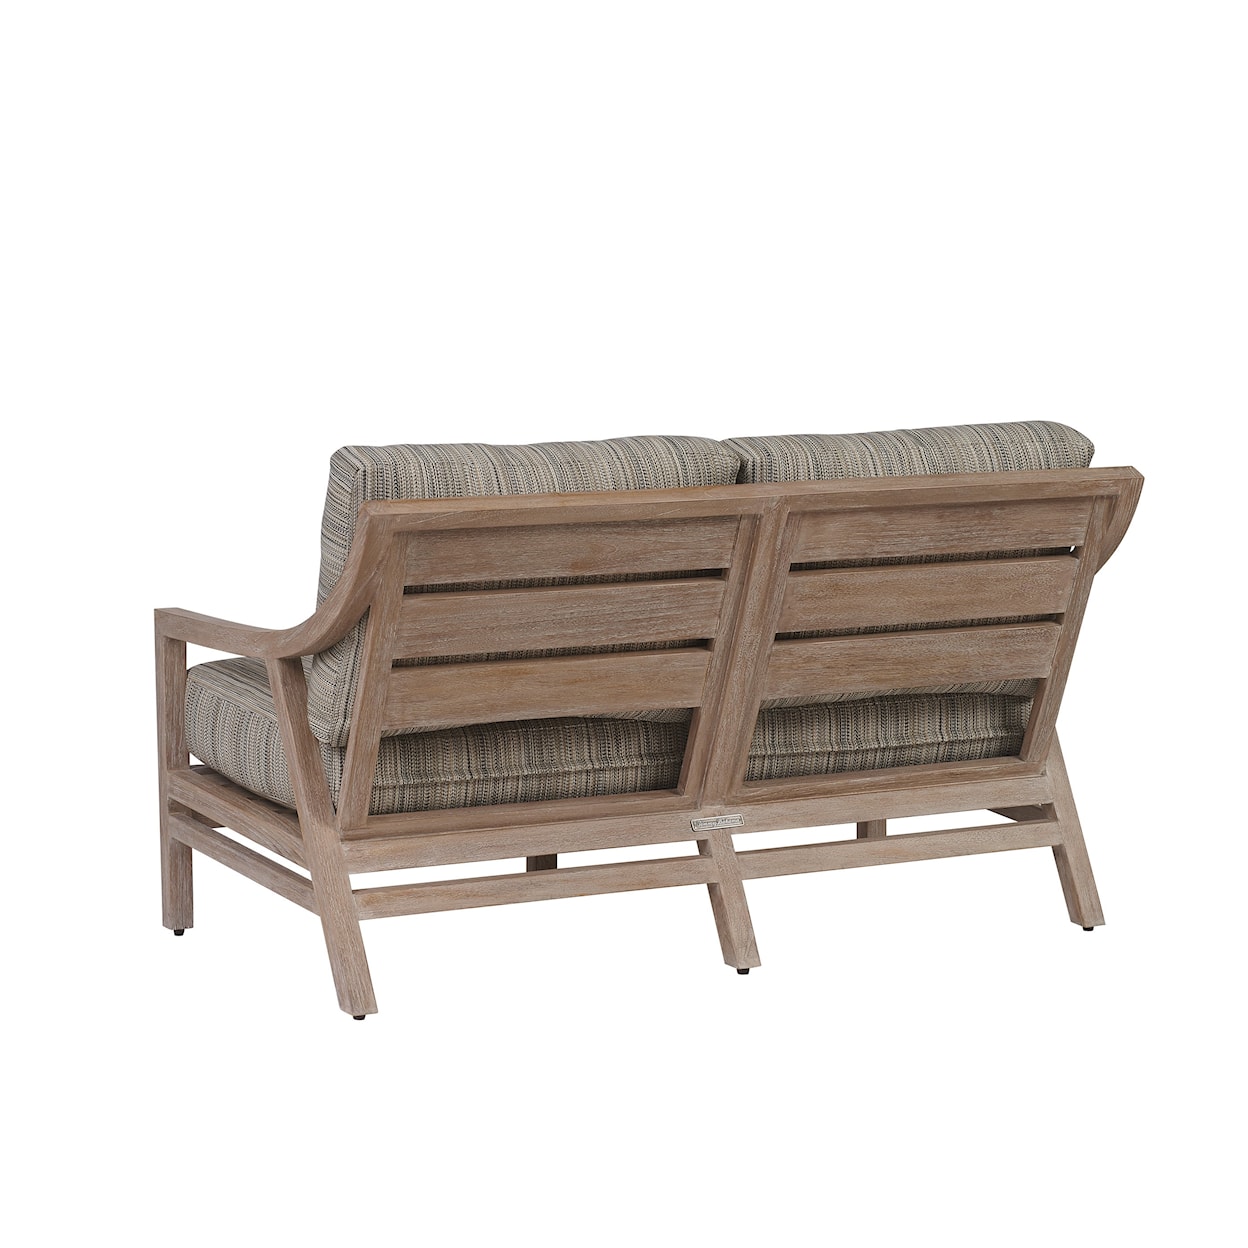 Tommy Bahama Outdoor Living Stillwater Cove Outdoor Loveseat